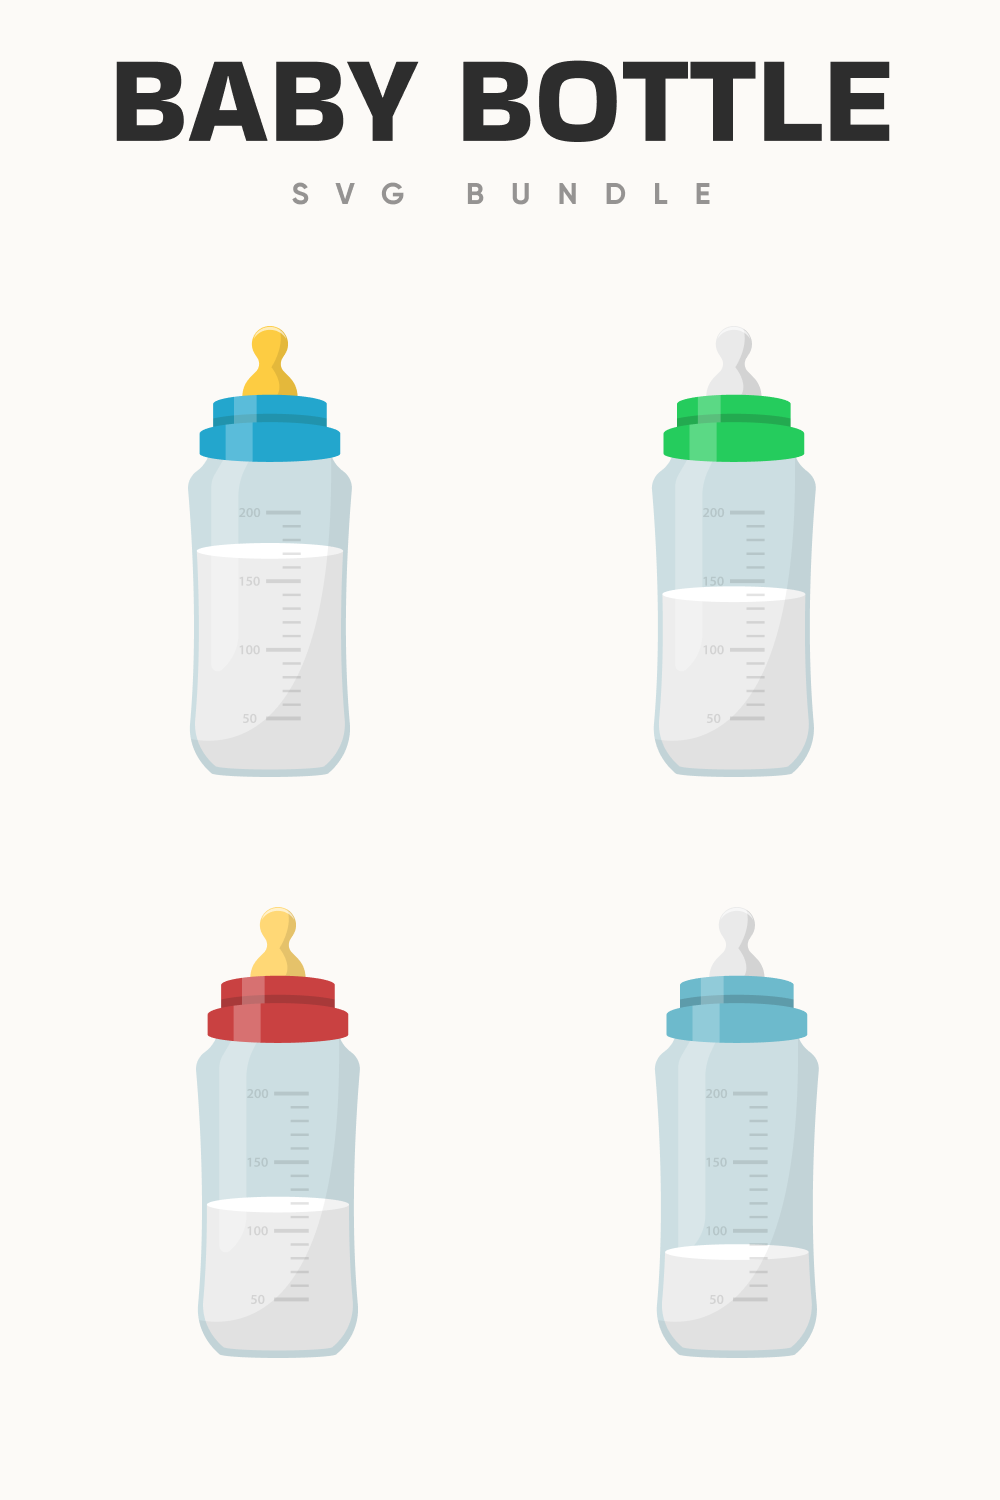 Baby bottles in different colors.